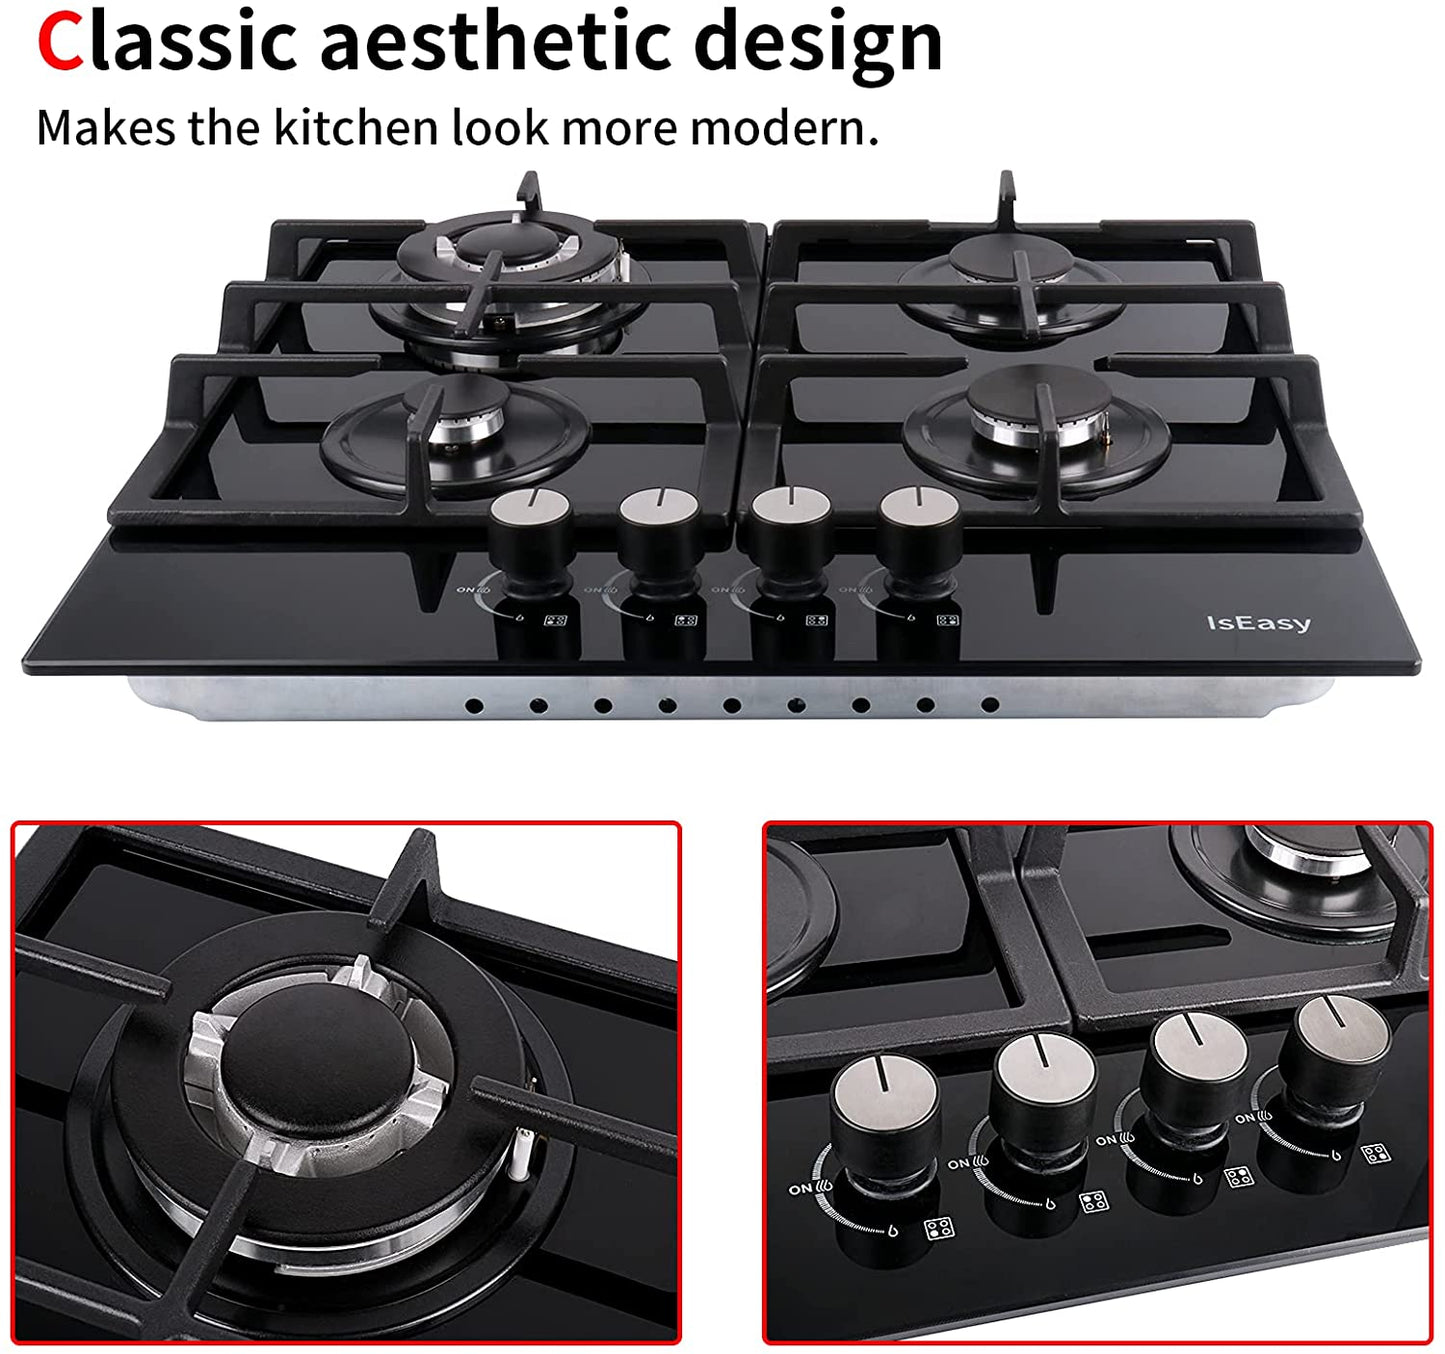 24" Built-in Gas Cooktop, 4 Burner Gas Stovetop, 120V Dual Fuel LPG/NG Gas Cooker With Thermocouple Protection, 4 Burner Gas Stovetop With Thermocouple Protection, Black Tempered Glass-IsEasy